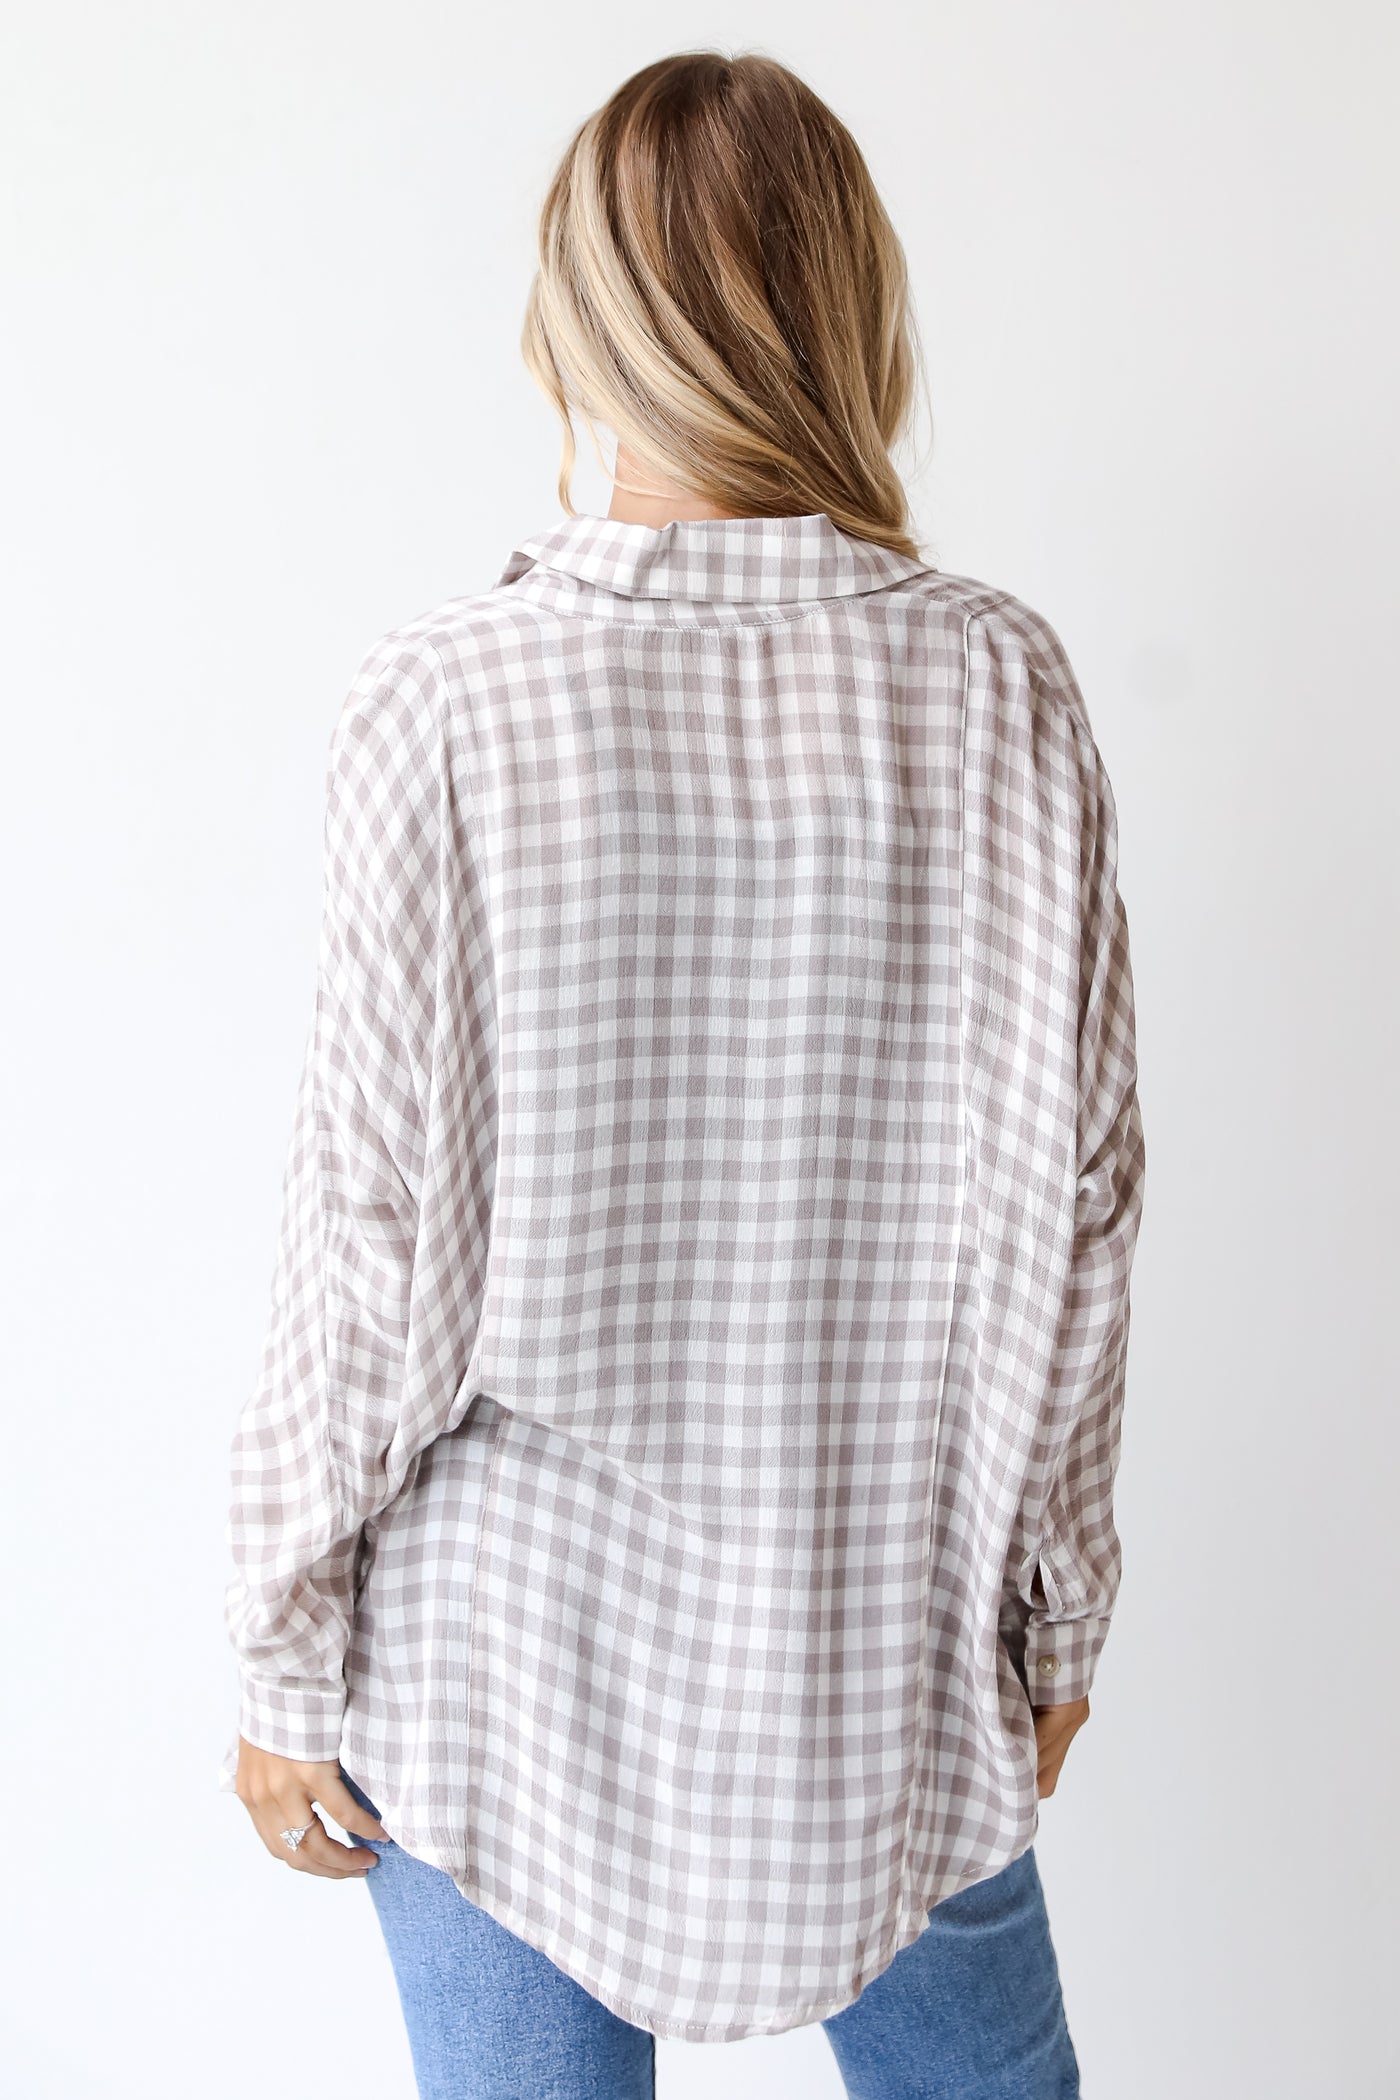 Plaid Checkered Flannel back view